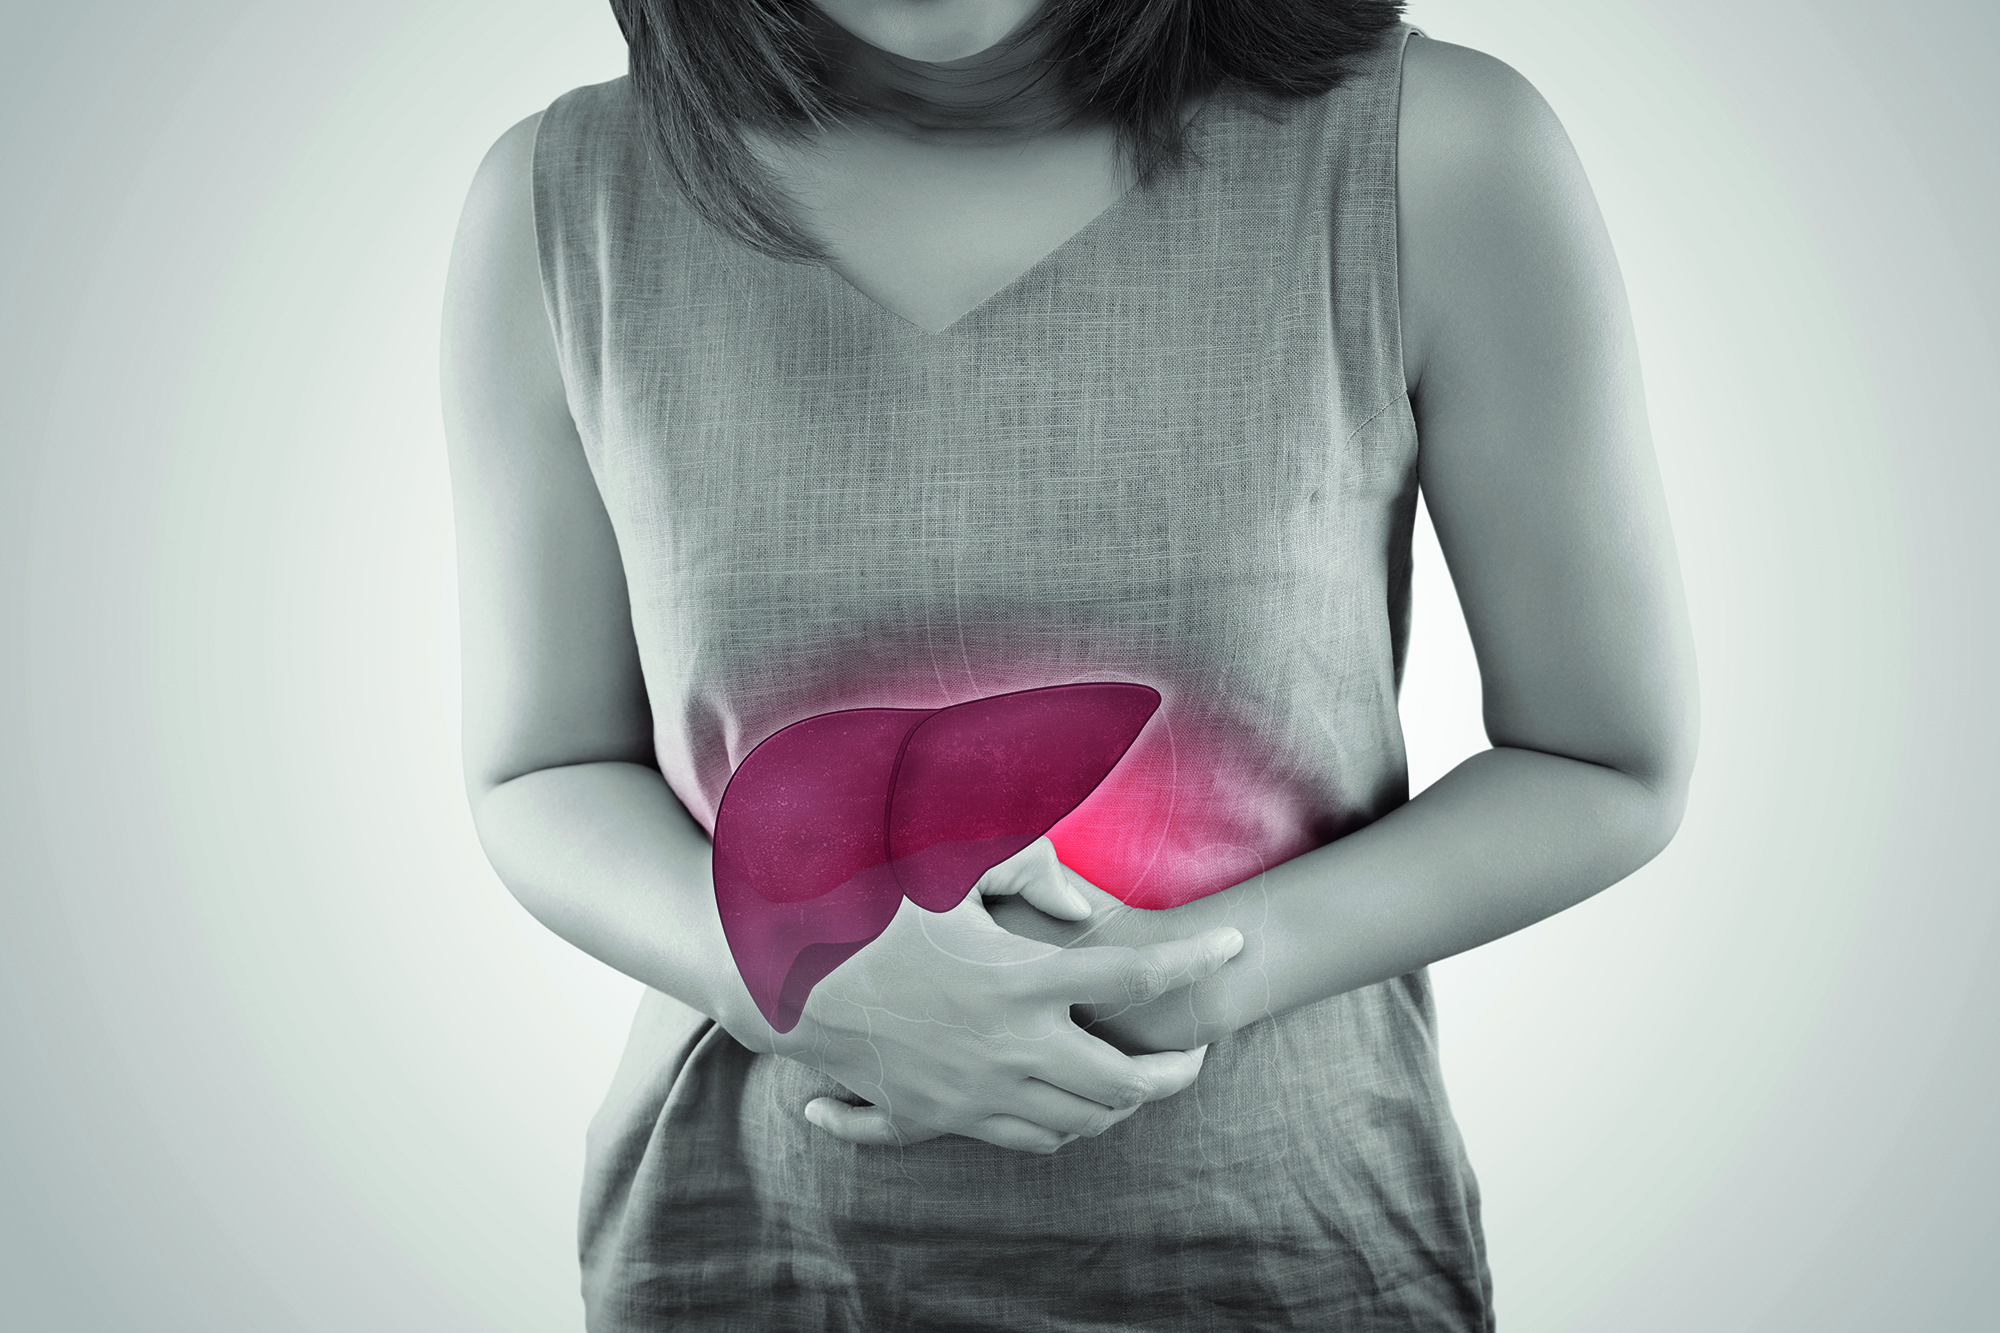 The Photo Of Liver On Woman's Body Against Gray Background, Hepatitis, Concept with Healthcare And Medicine